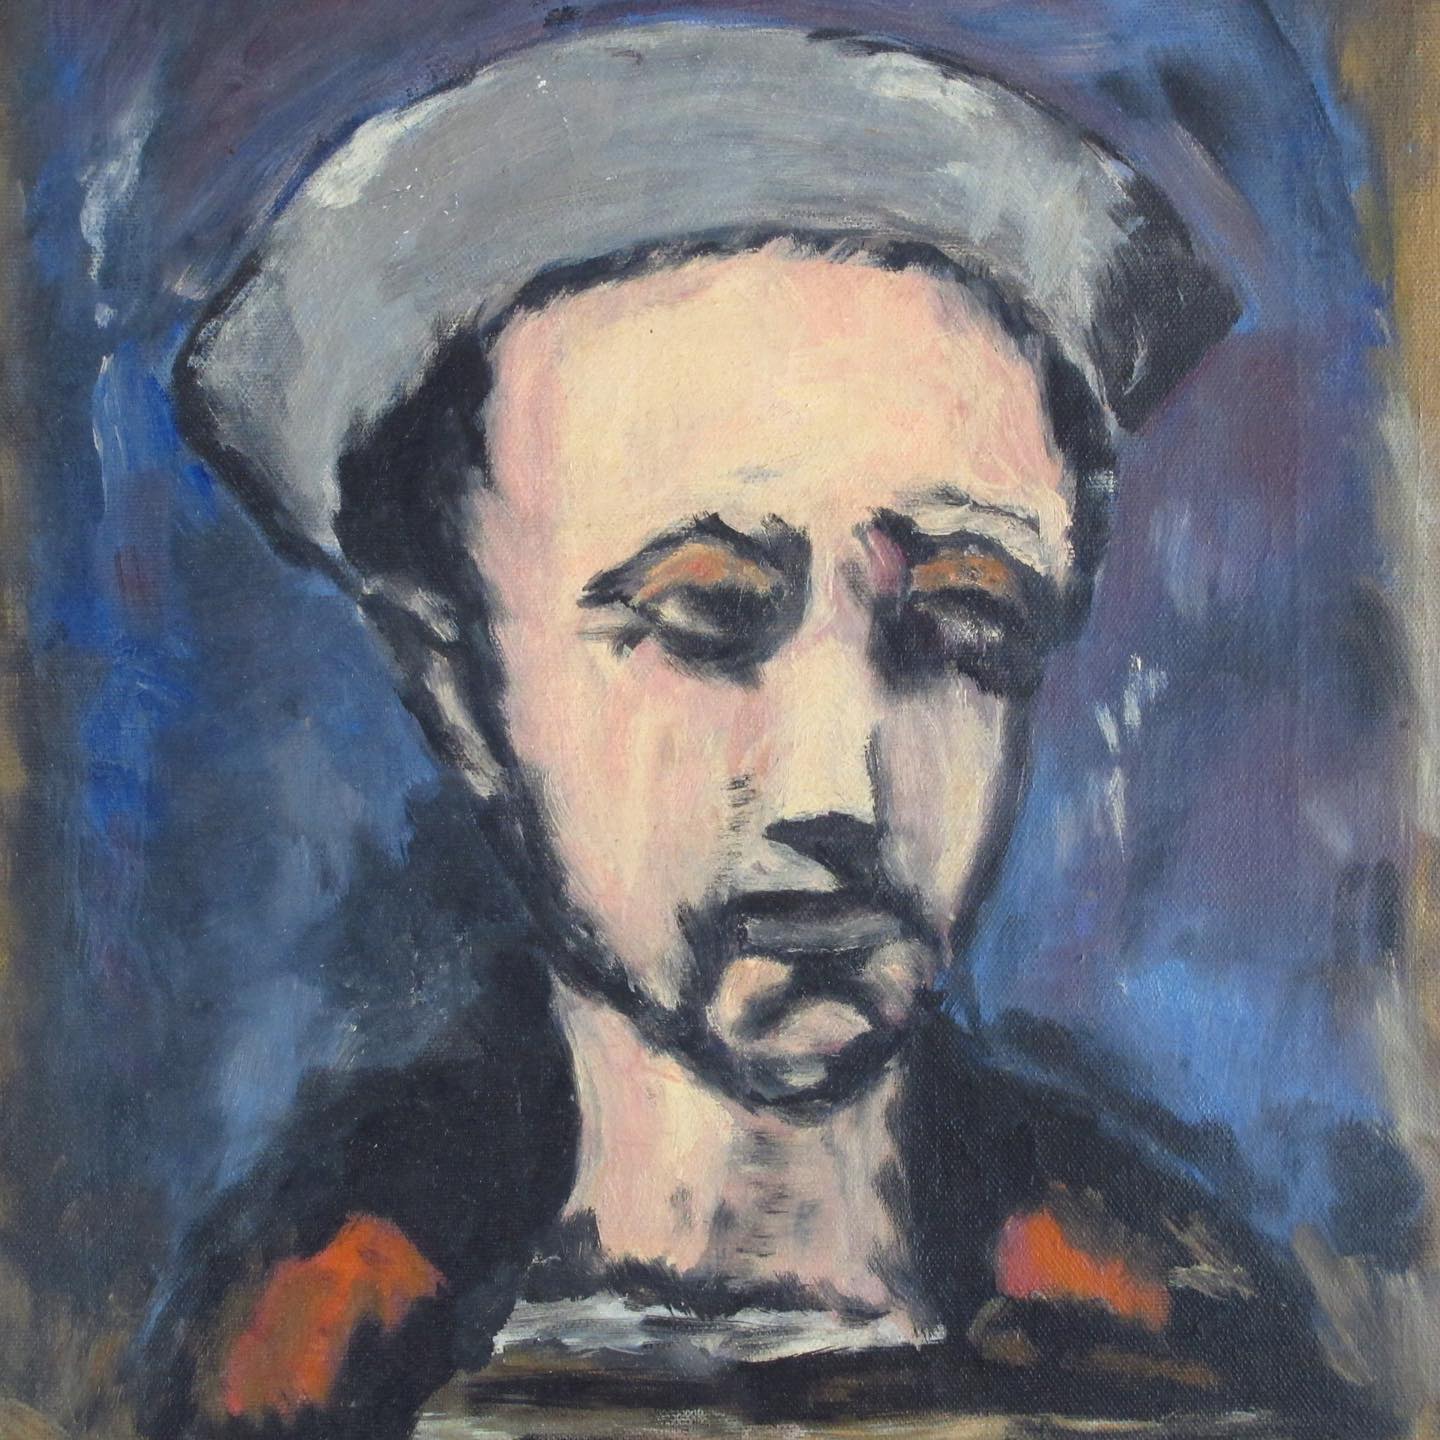 Oil on Canvas Sailor Portrait in the manner of Georges Rouault, c. 1950